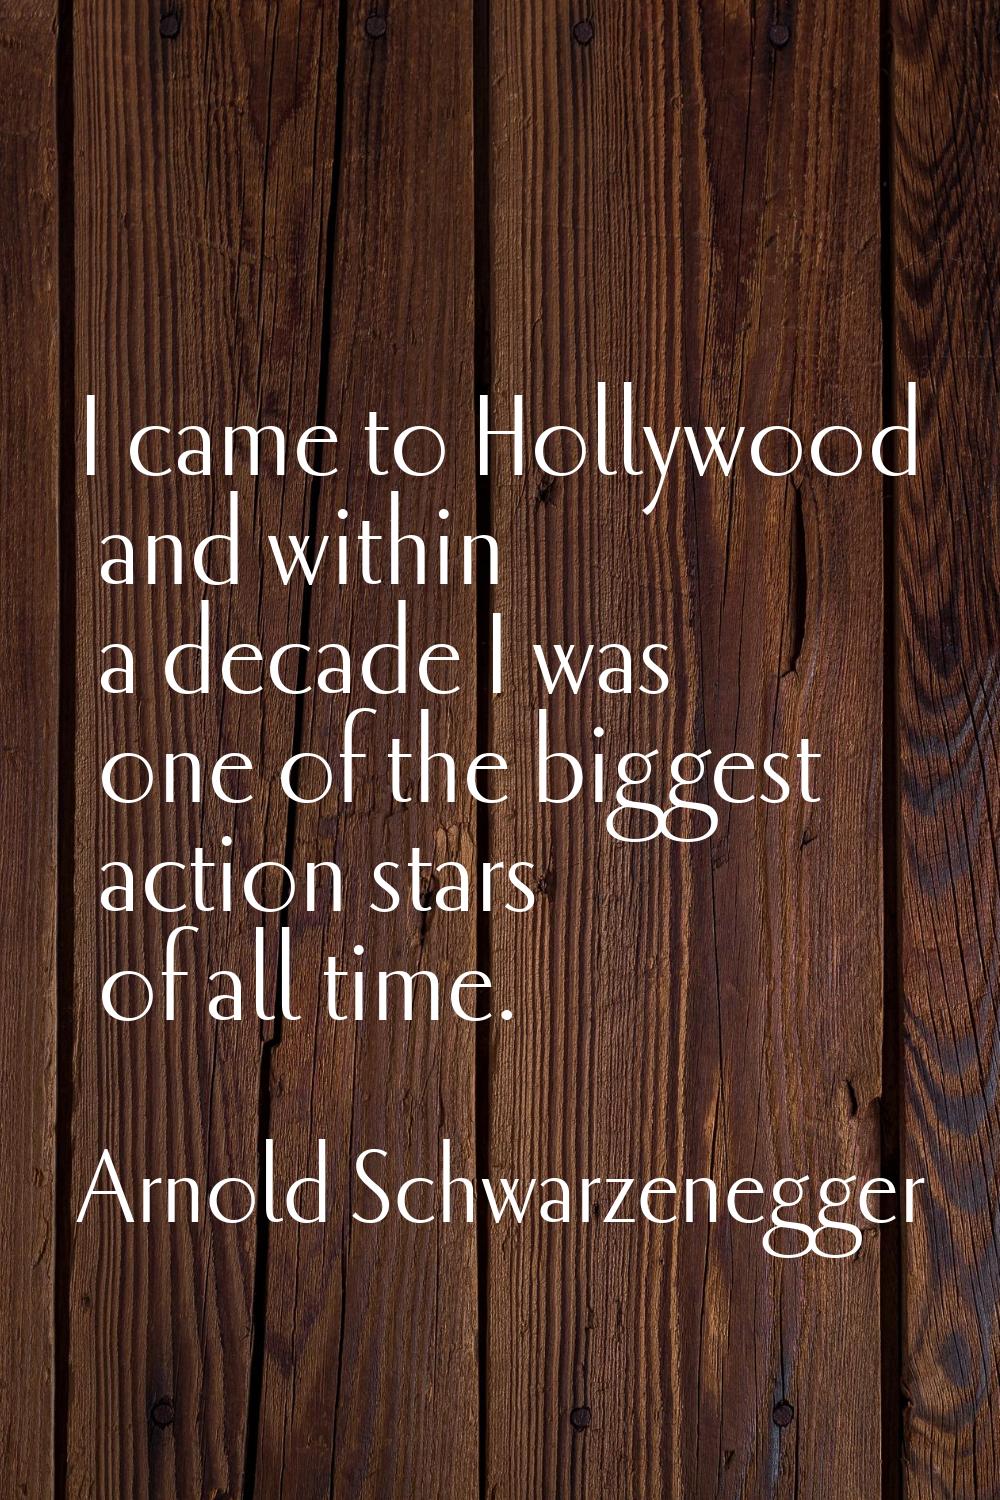 I came to Hollywood and within a decade I was one of the biggest action stars of all time.